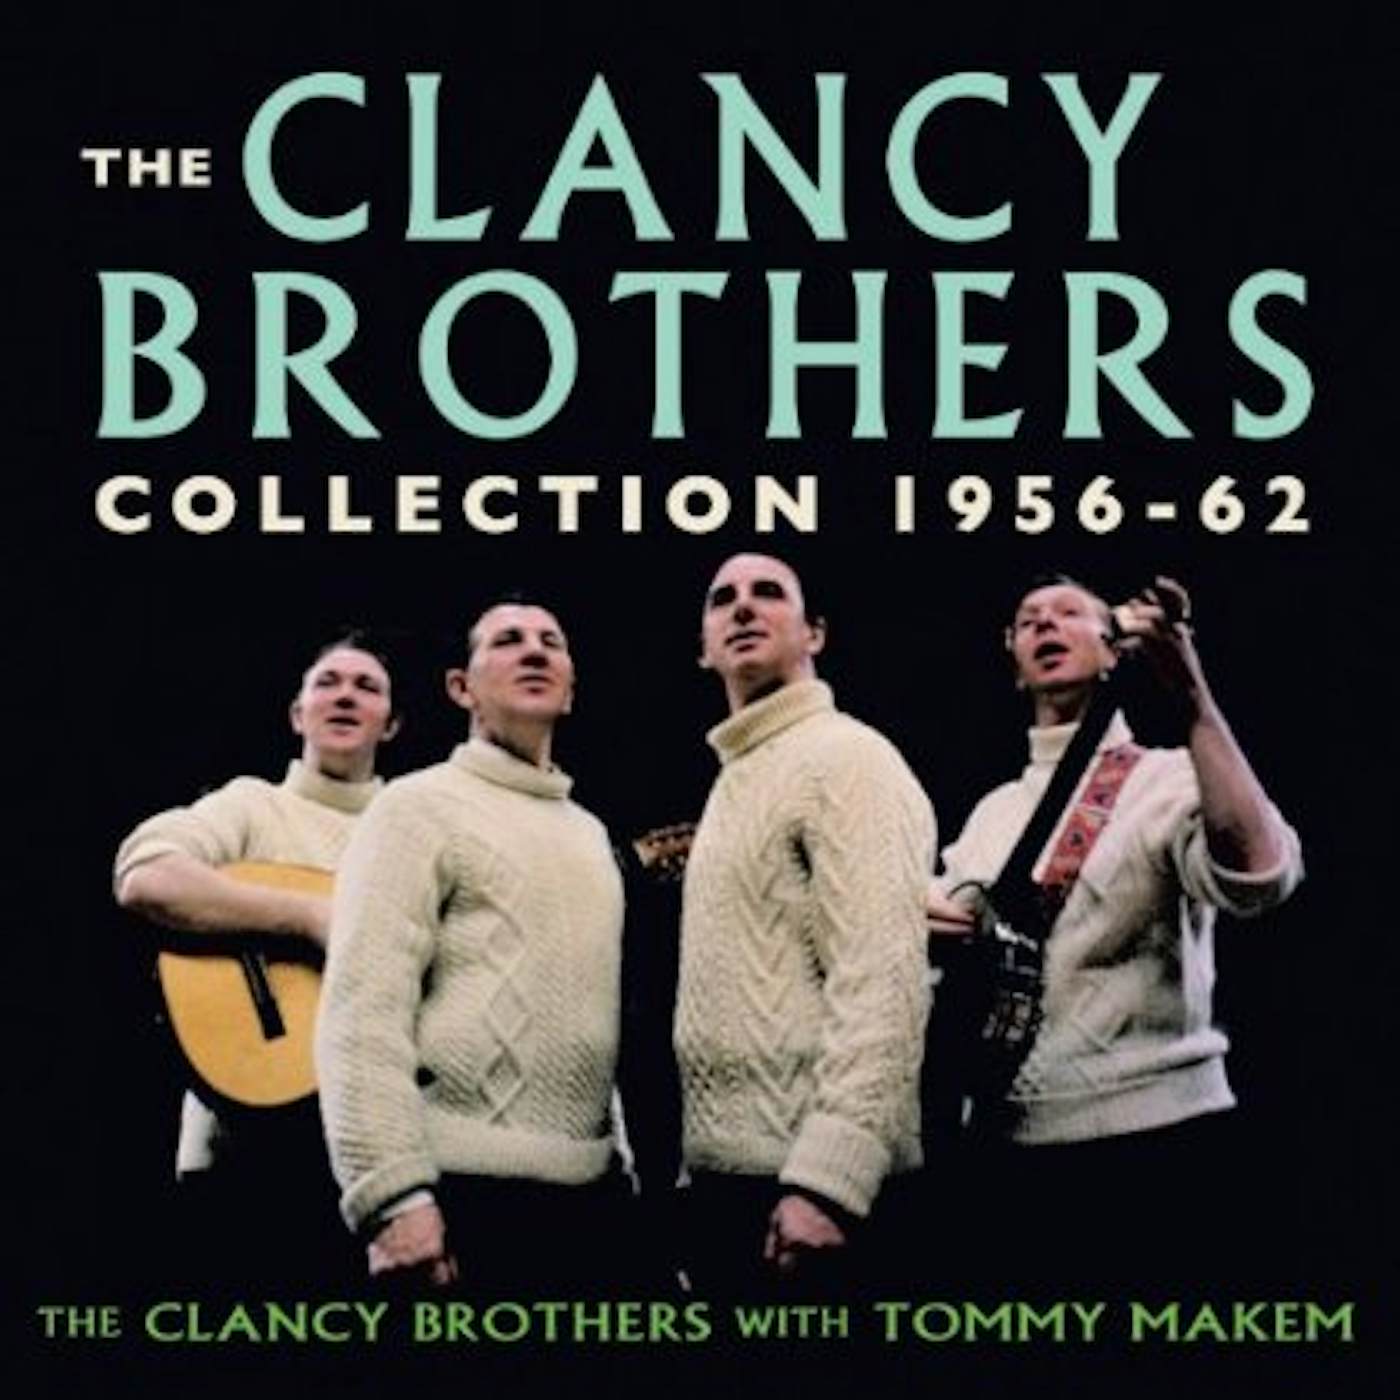 The Clancy Brothers COLLECTION 1956-62 CD